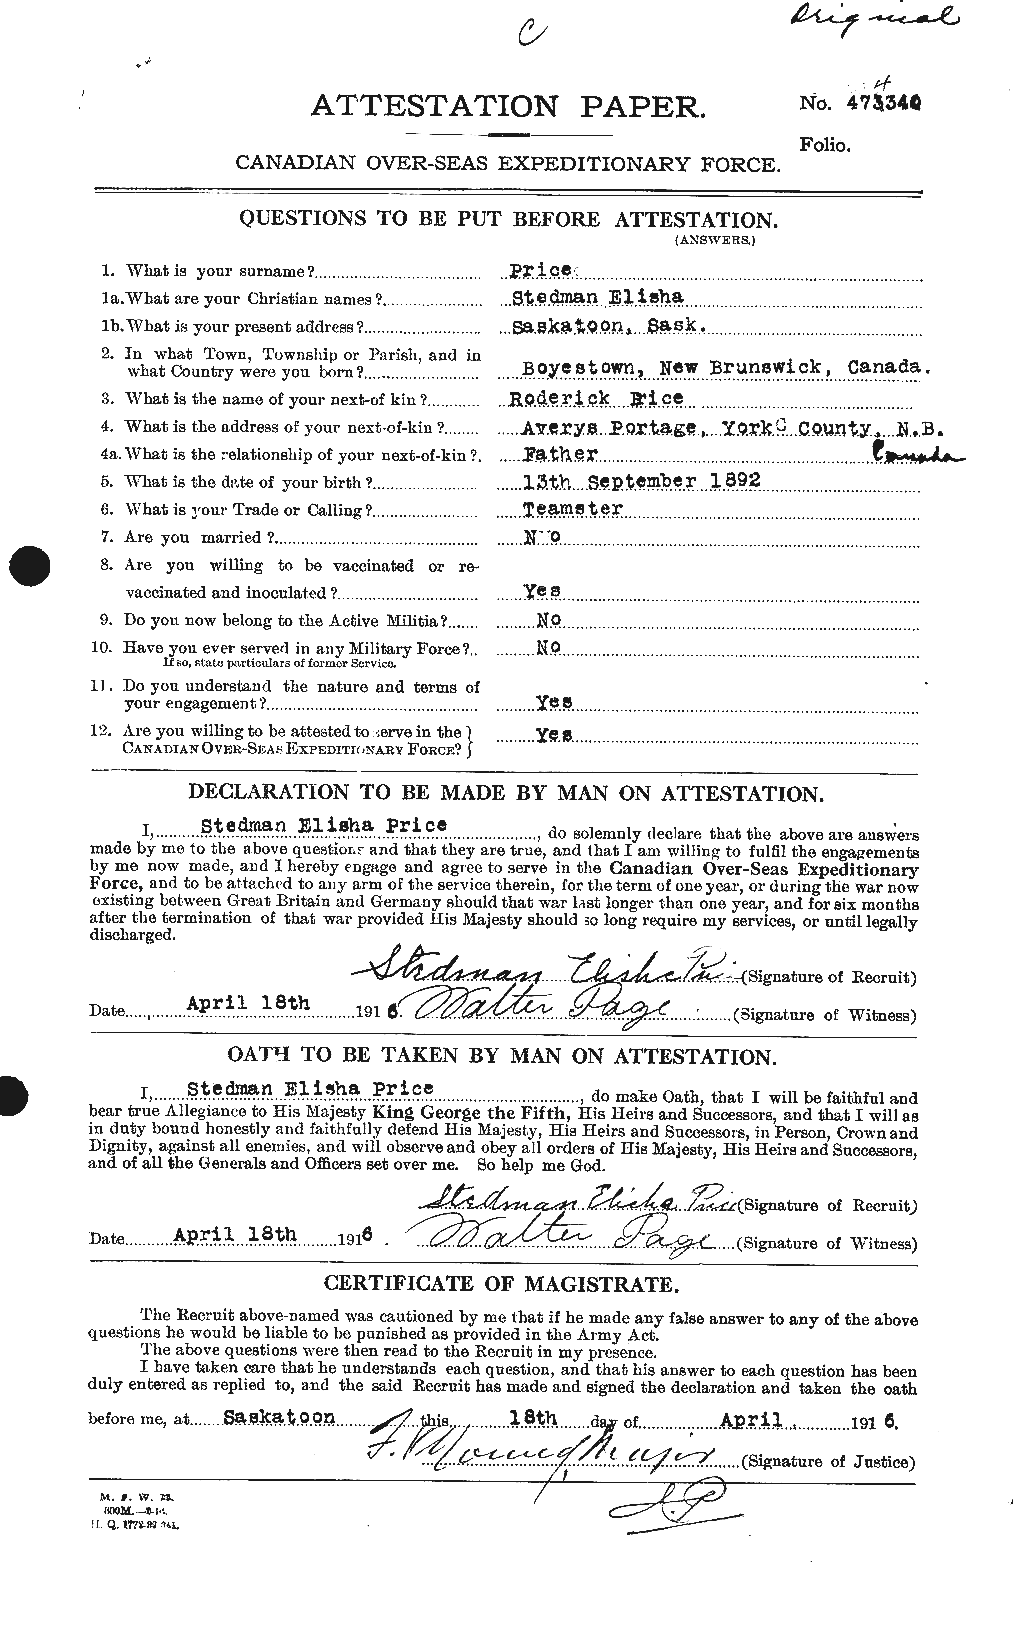 Personnel Records of the First World War - CEF 587363a